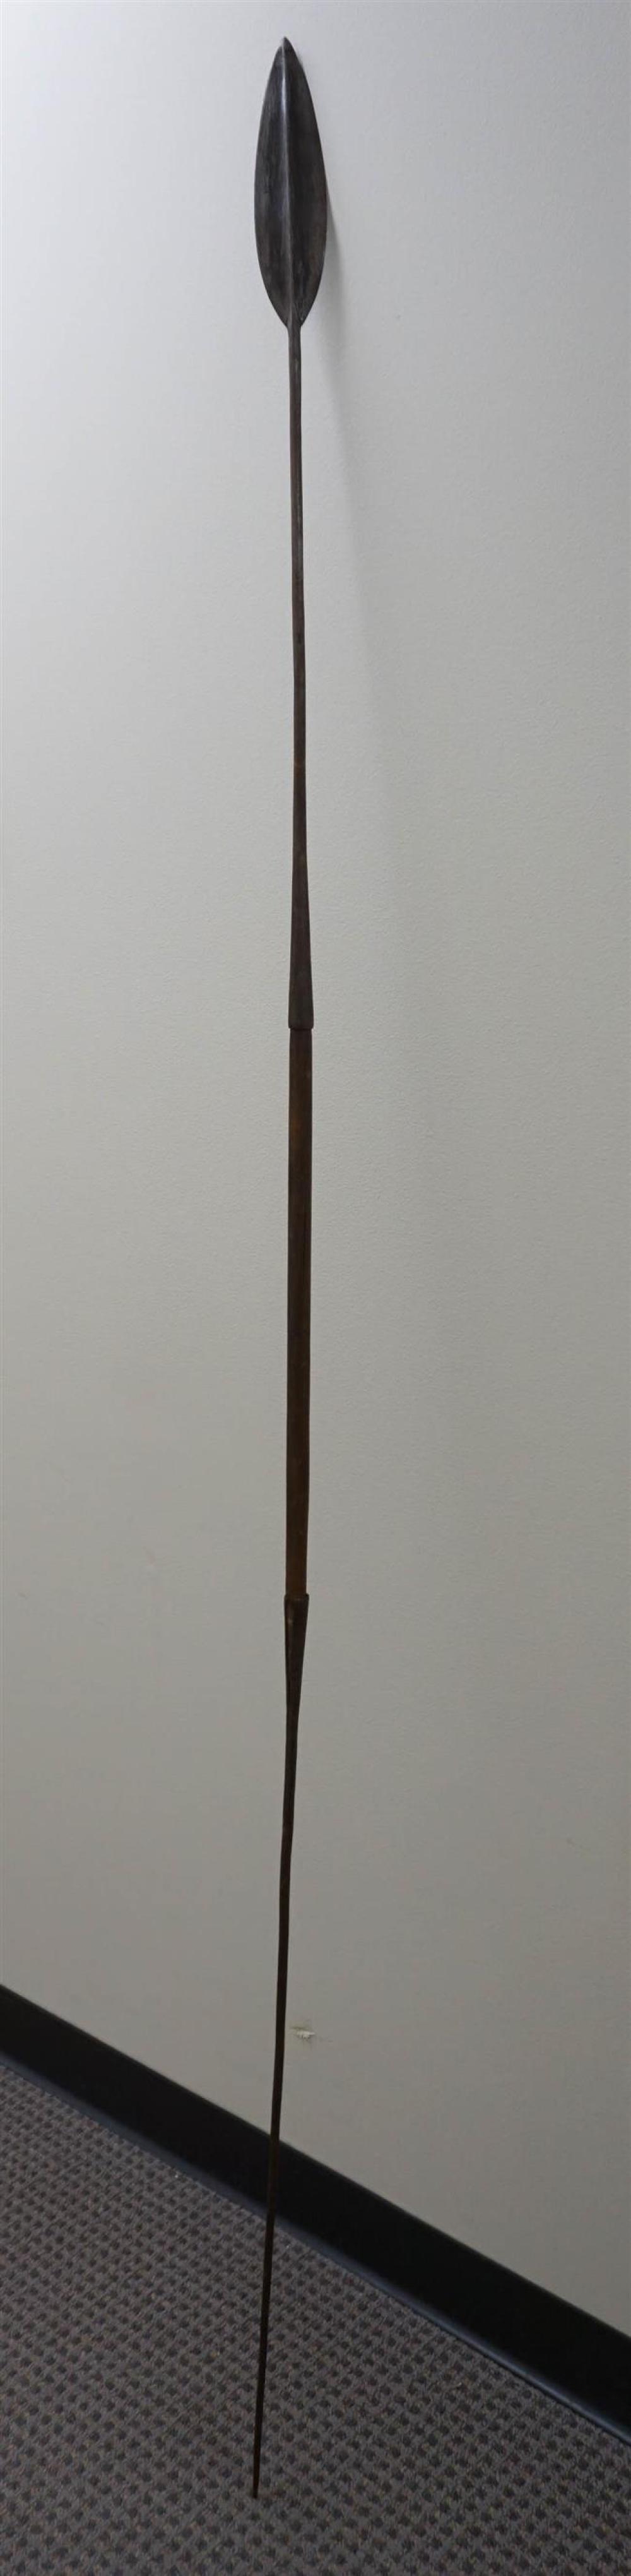 AFRICAN STEEL AND WOOD SPEAR L  324a73